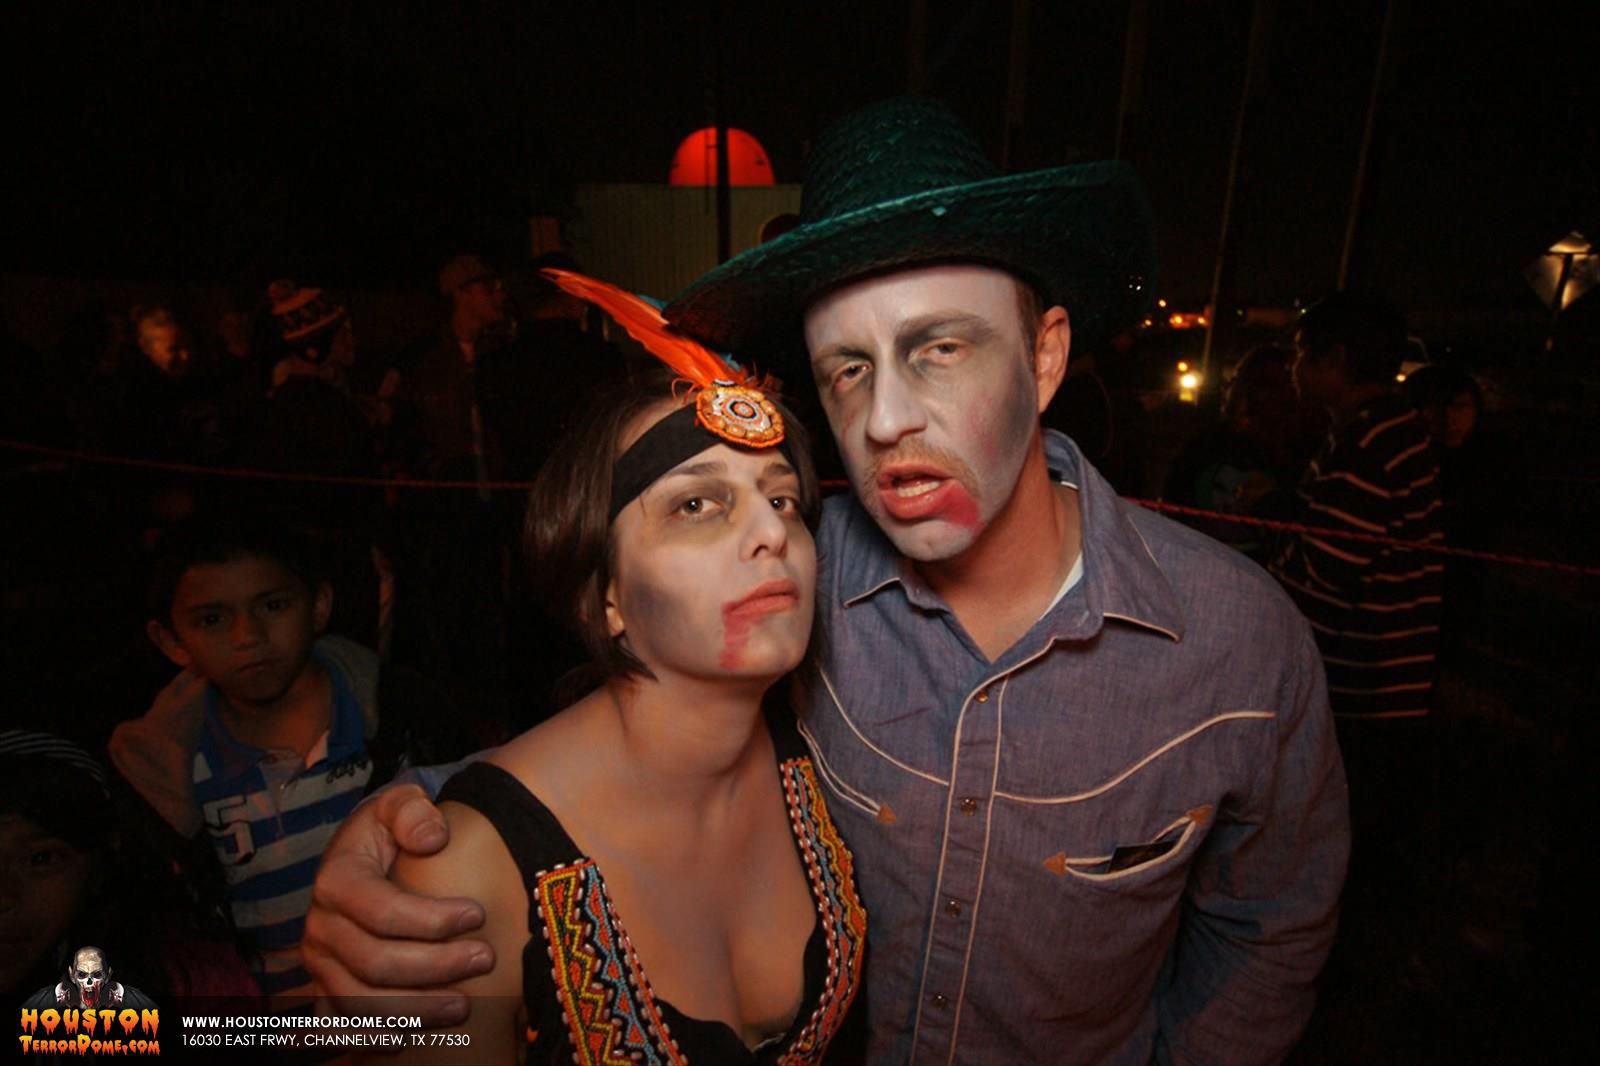 Couple dressed up waiting to be scared. 